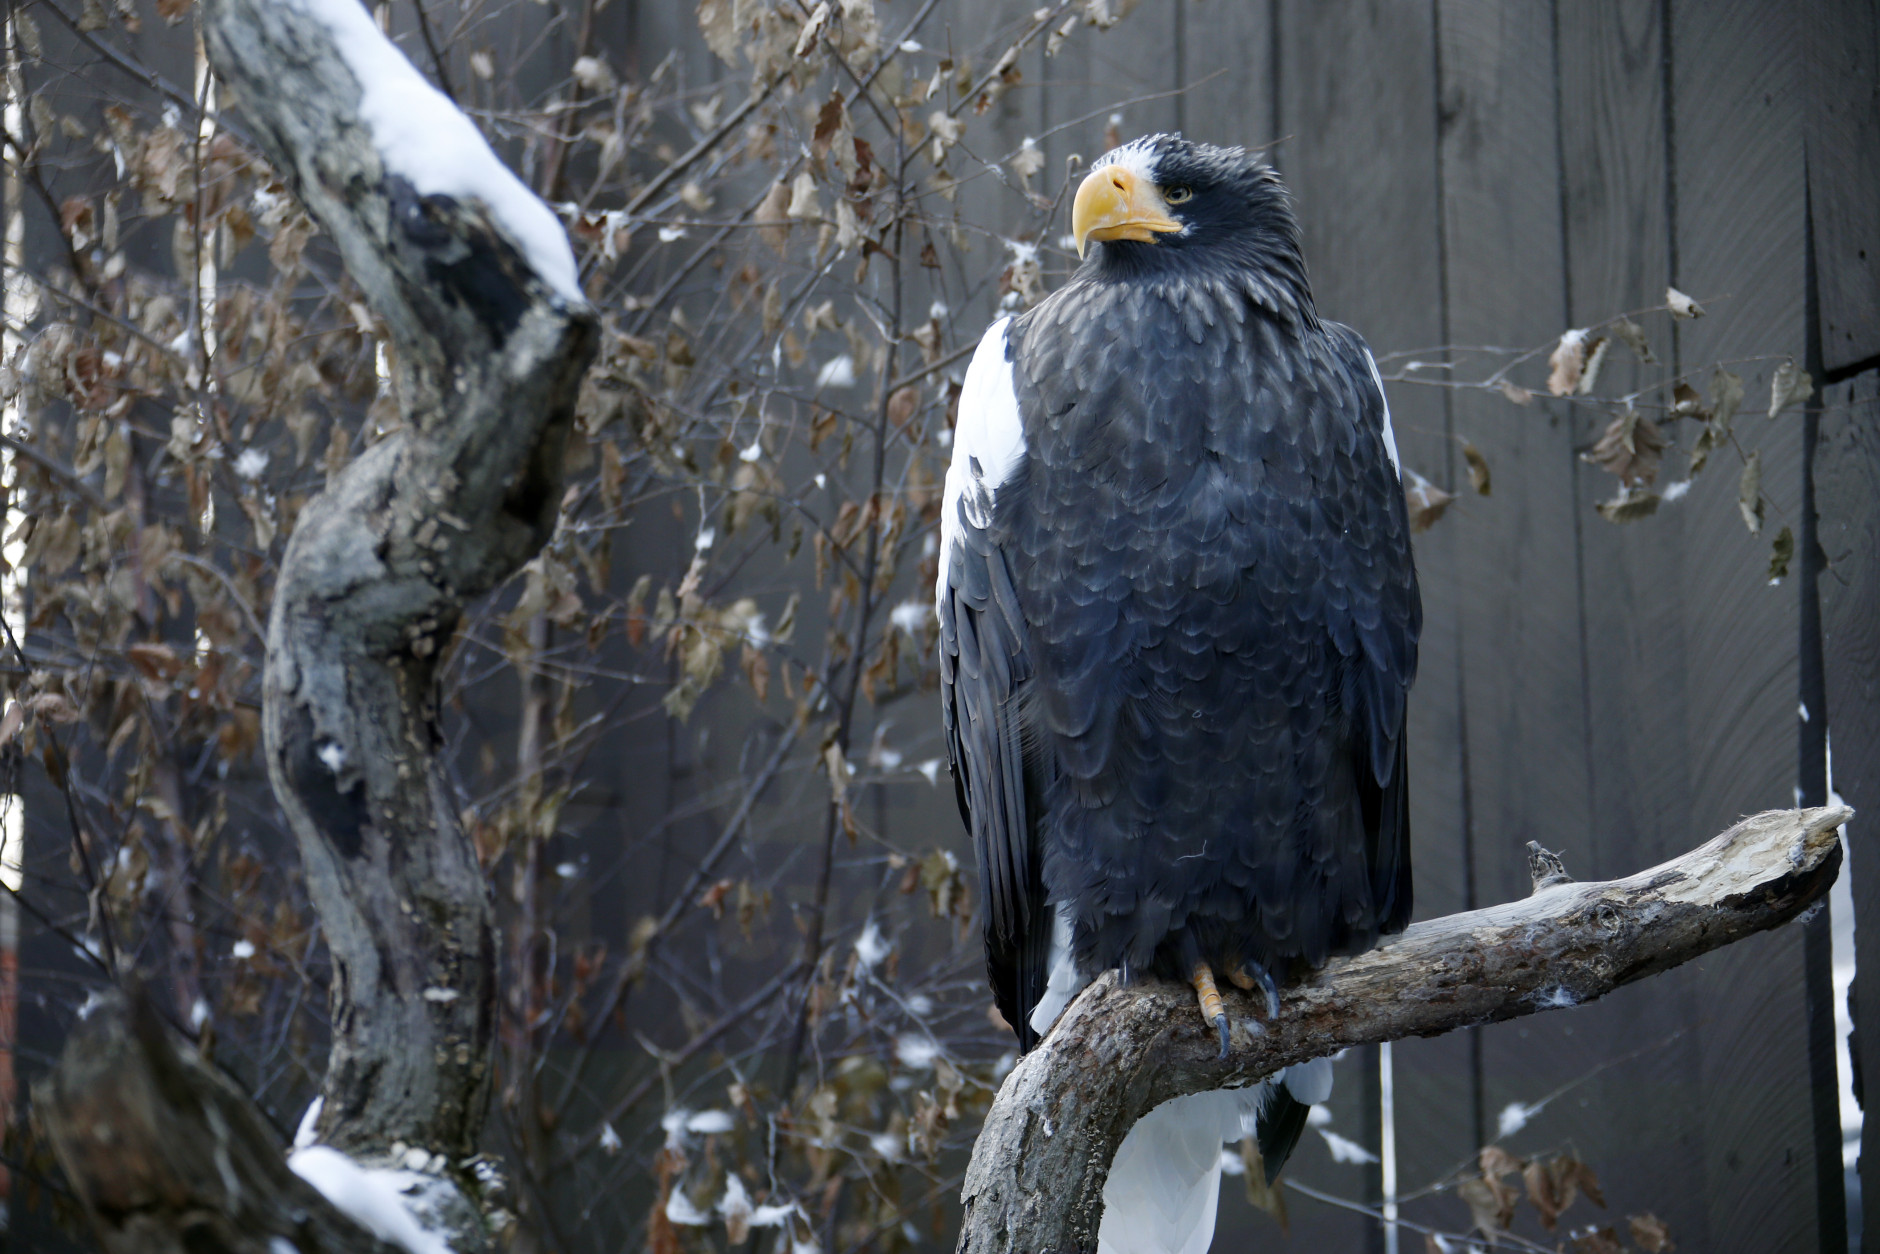 A Steller's Sea-Eagle, also known as a Pacific or While-shouldered Eagle, sits on a branch in an exhibit at the National Aviary of Pittsburgh in Pittsburgh, Thursday, Jan. 8, 2015. (AP Photo/Gene J. Puskar)